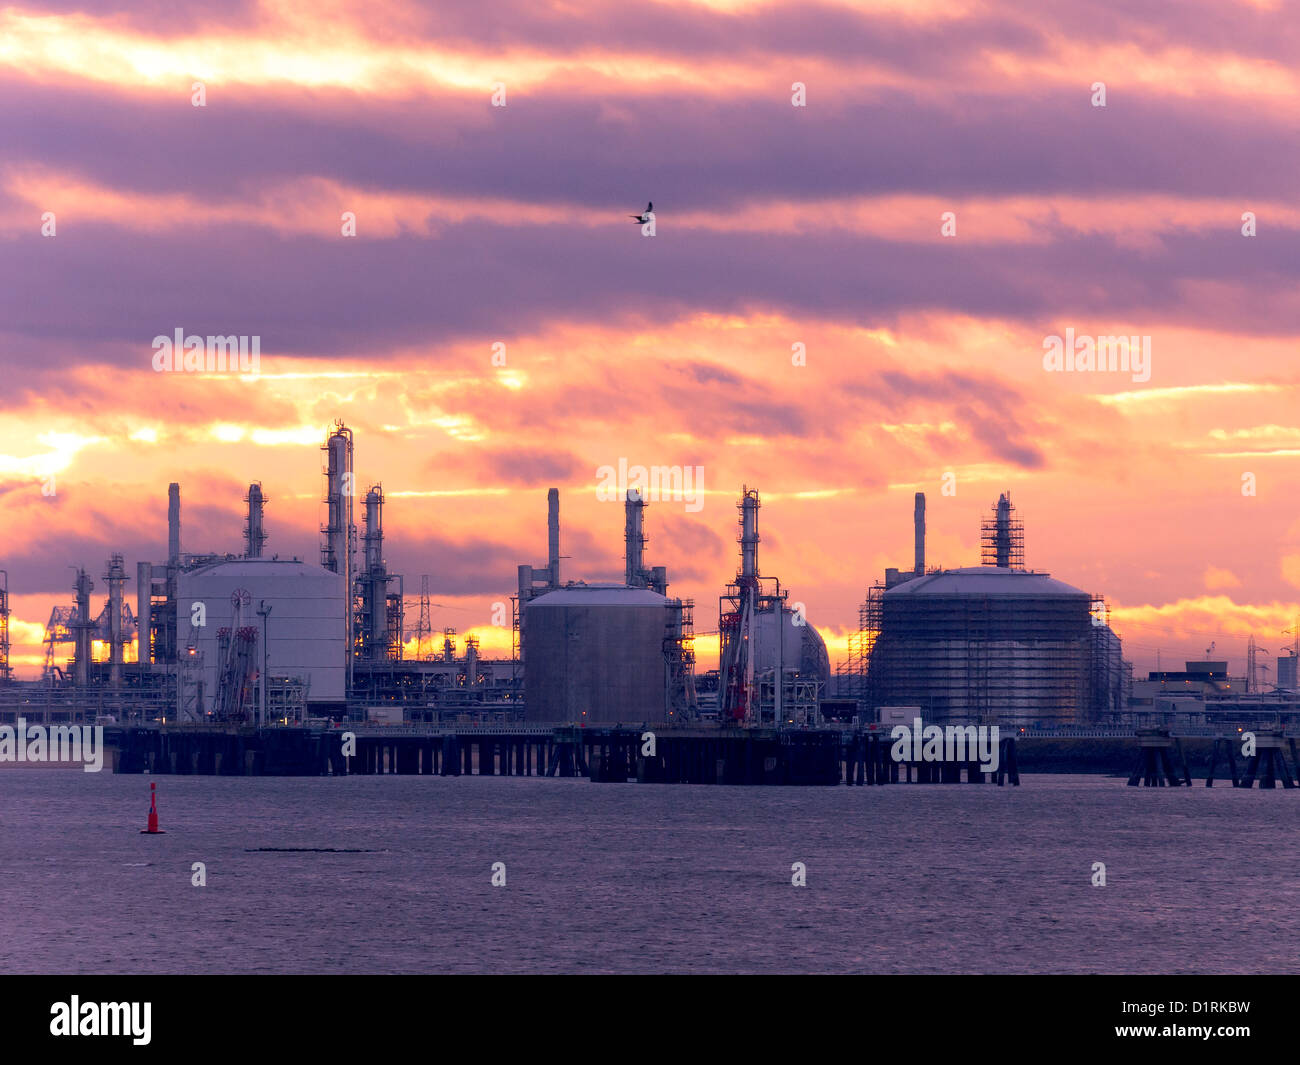 Teesside Oil Refinery in Cleveland UK  at sunset Stock Photo